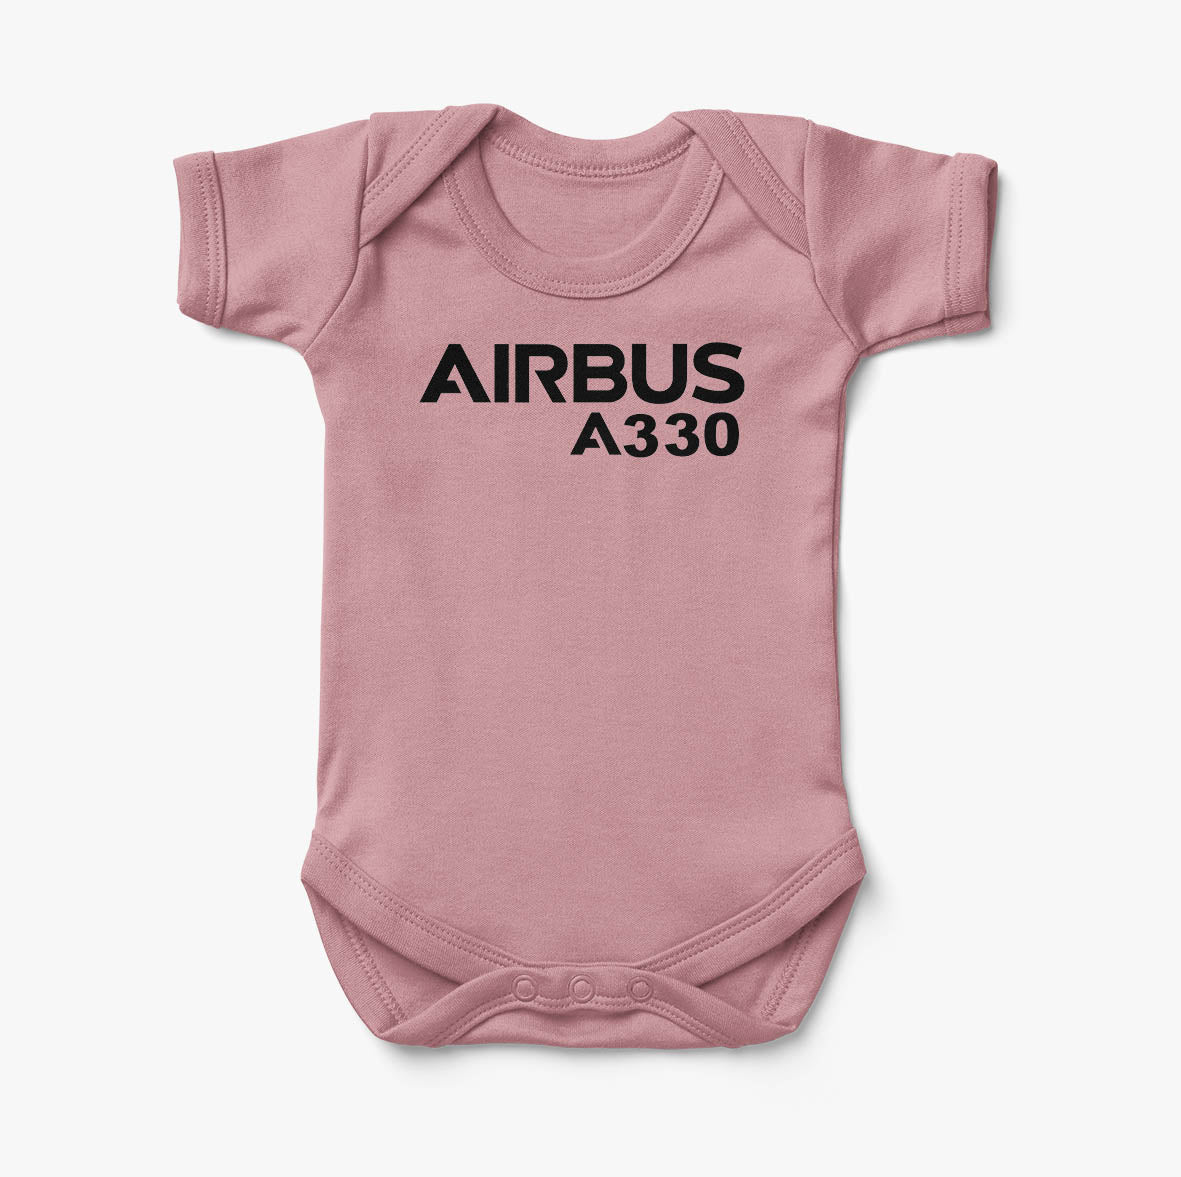 Airbus A330 & Text Designed Baby Bodysuits